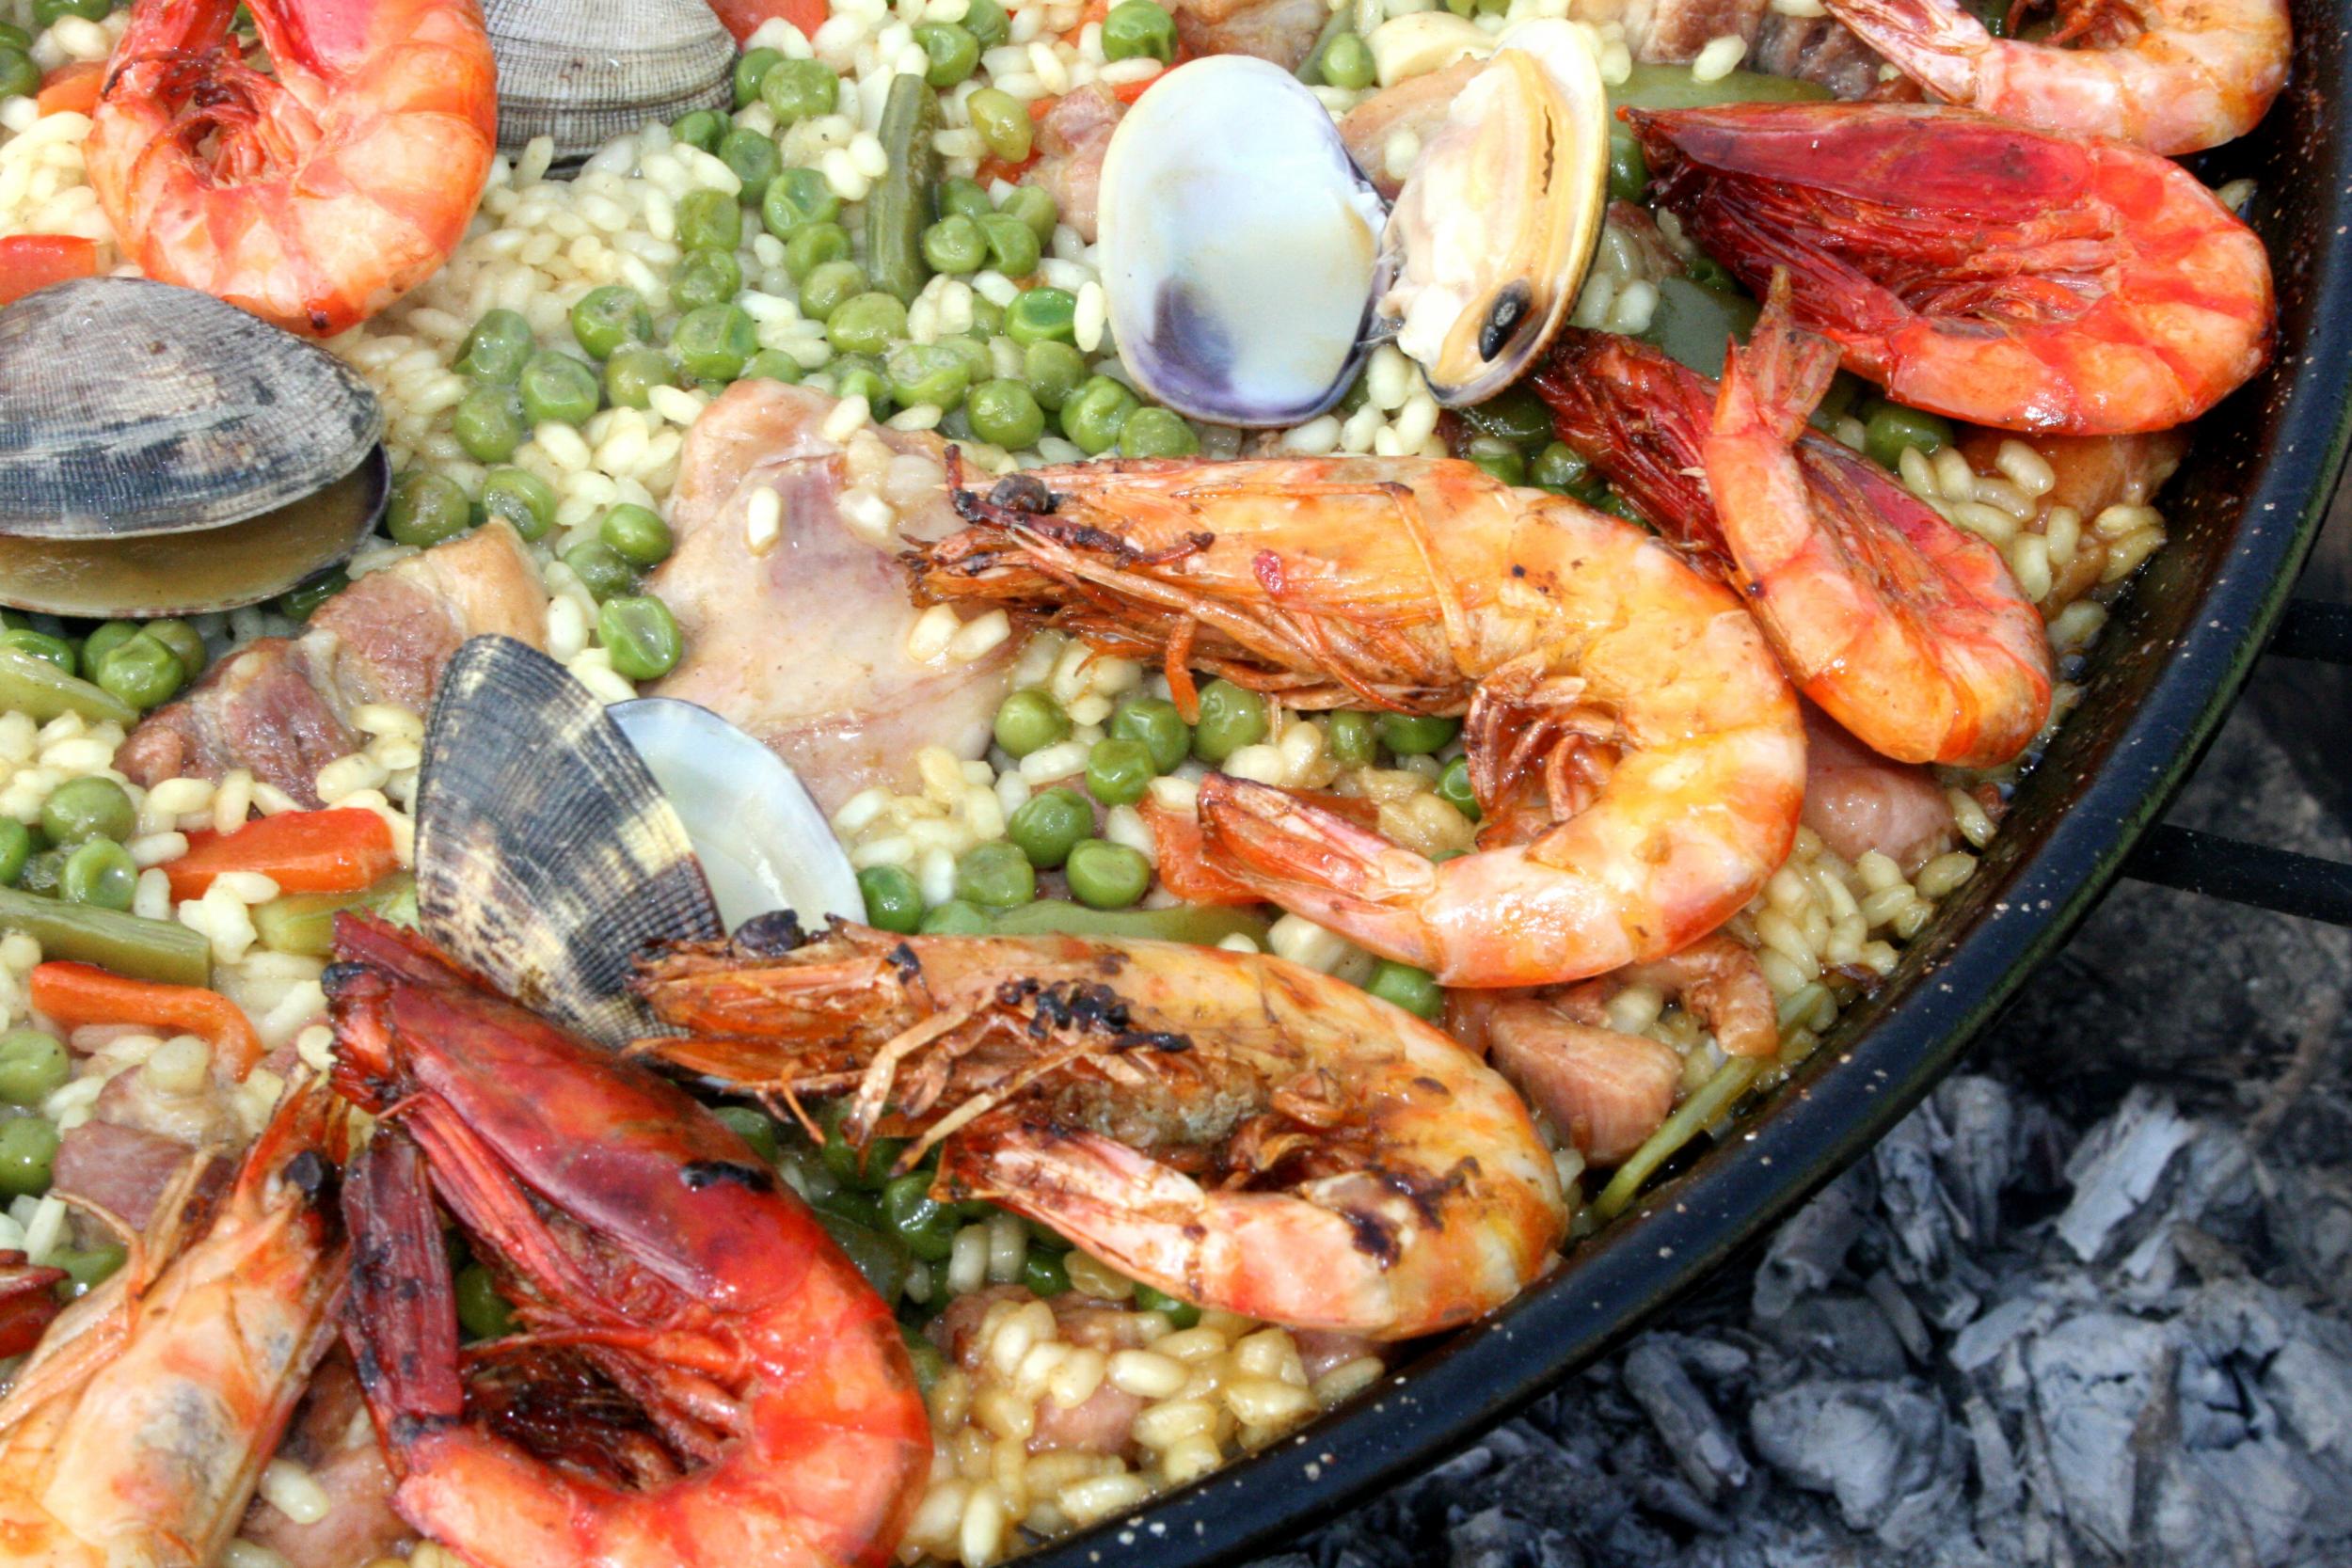 Fiesta del Marisco is all about the seafood